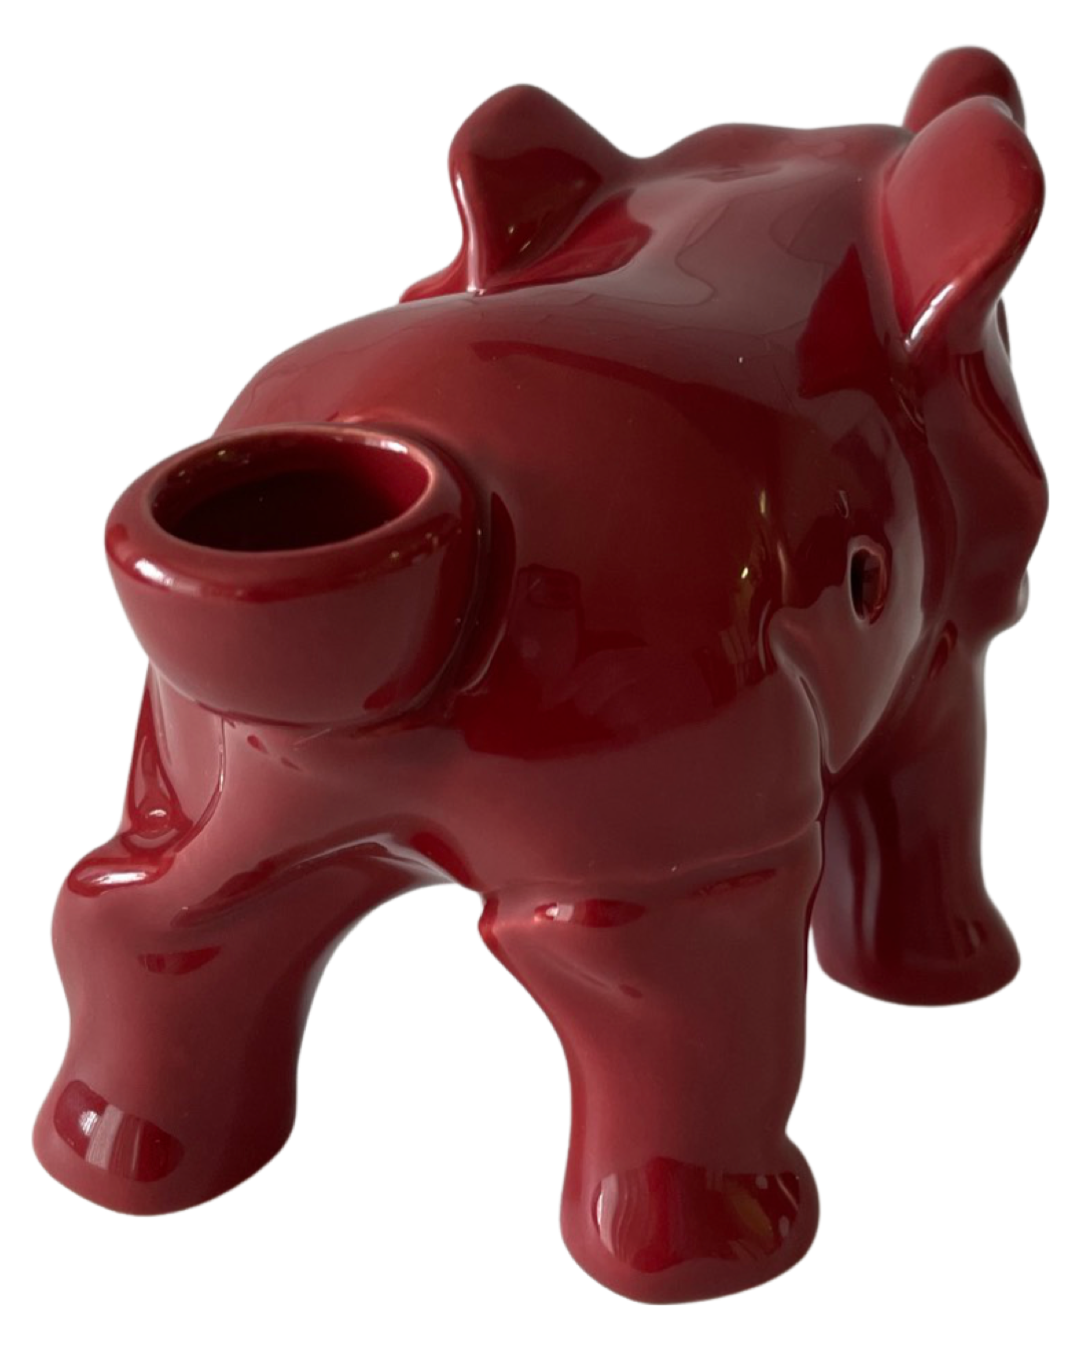 "Red Elephant" Pipe